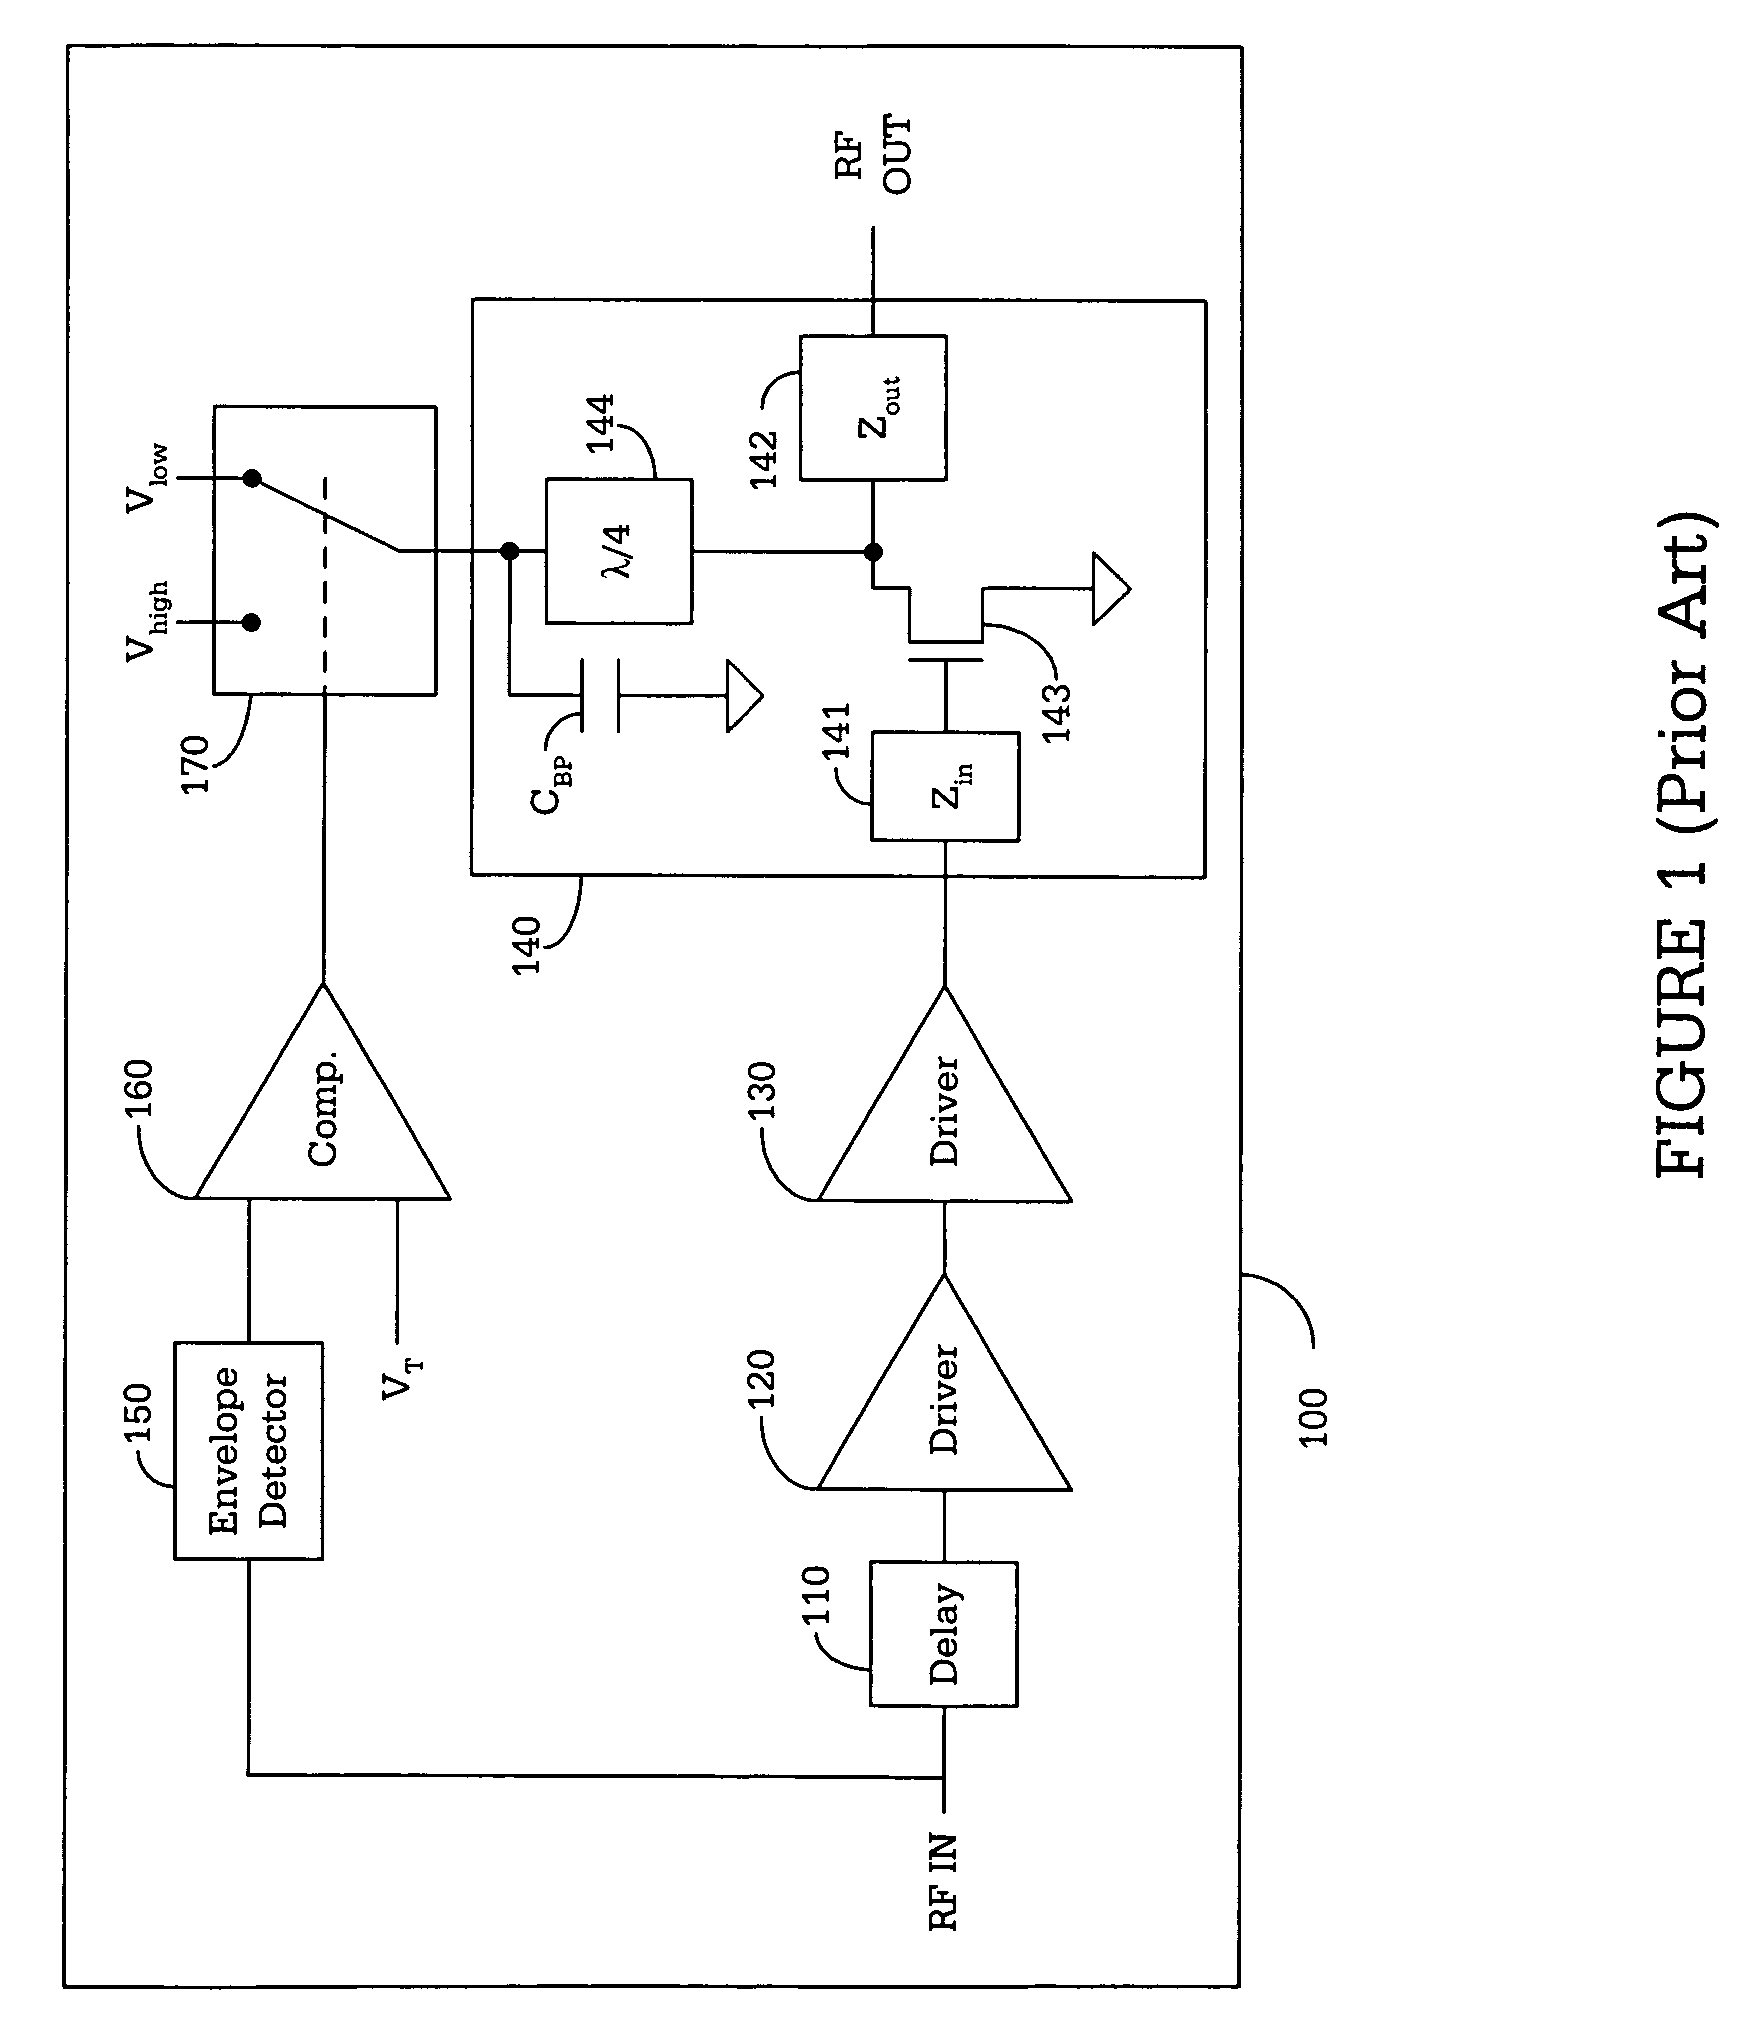 Apparatus and method for high efficiency RF power amplification using drain bias adaptation